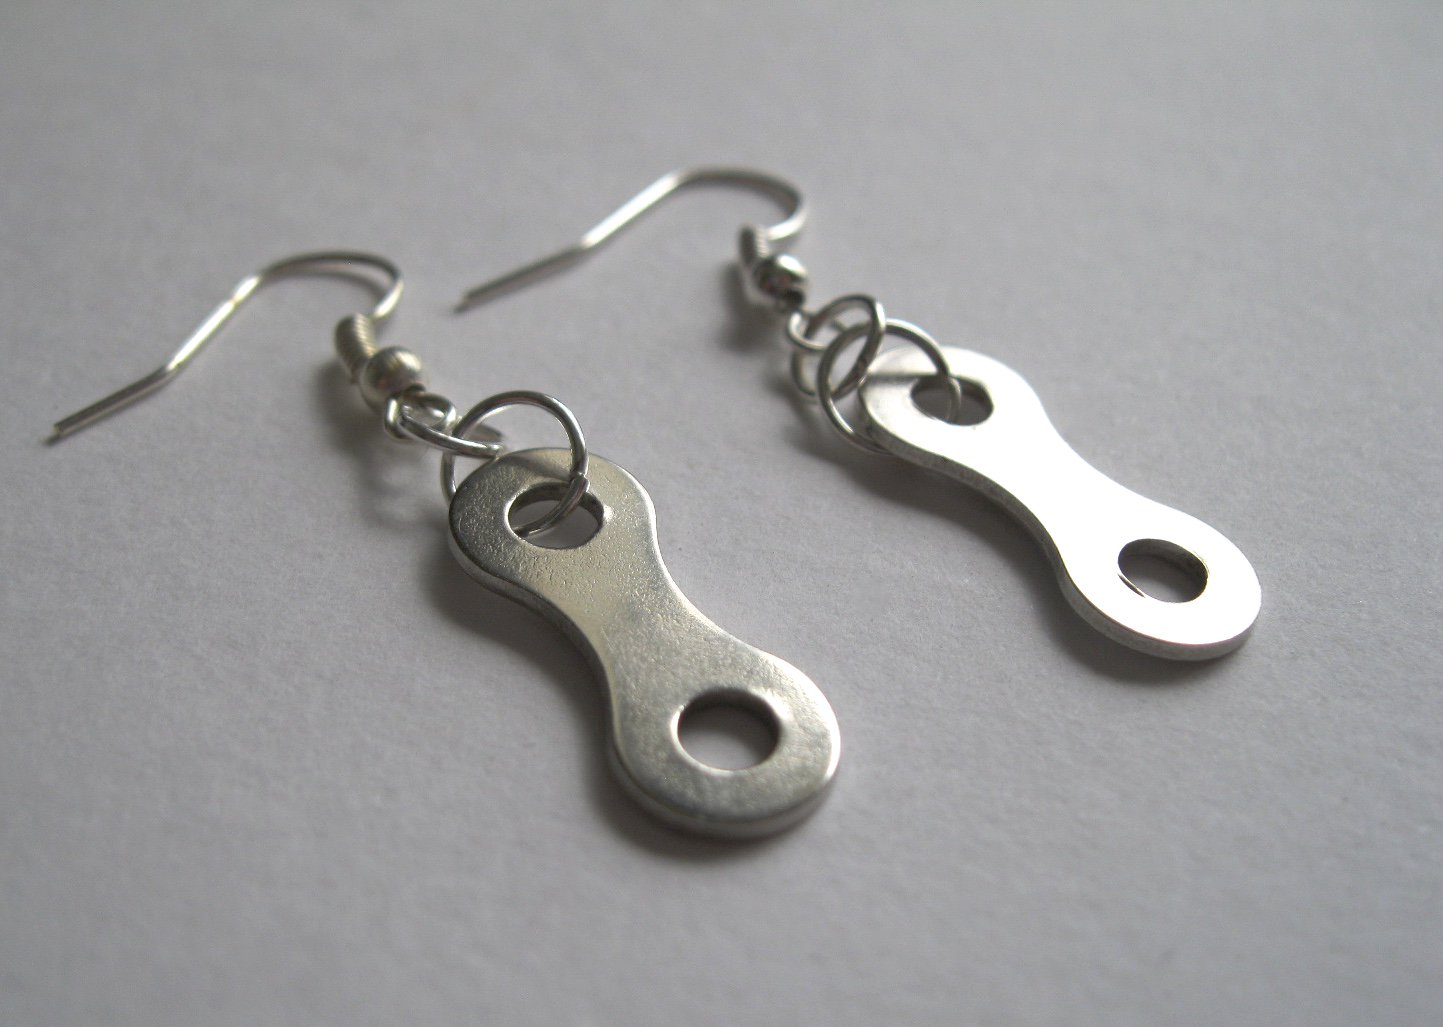 Bicycle jewelry for women Recycled bicycle jewelry Women's cycling gifts Upcycled bike jewelry, Gifts for cyclists Bicycle earrings